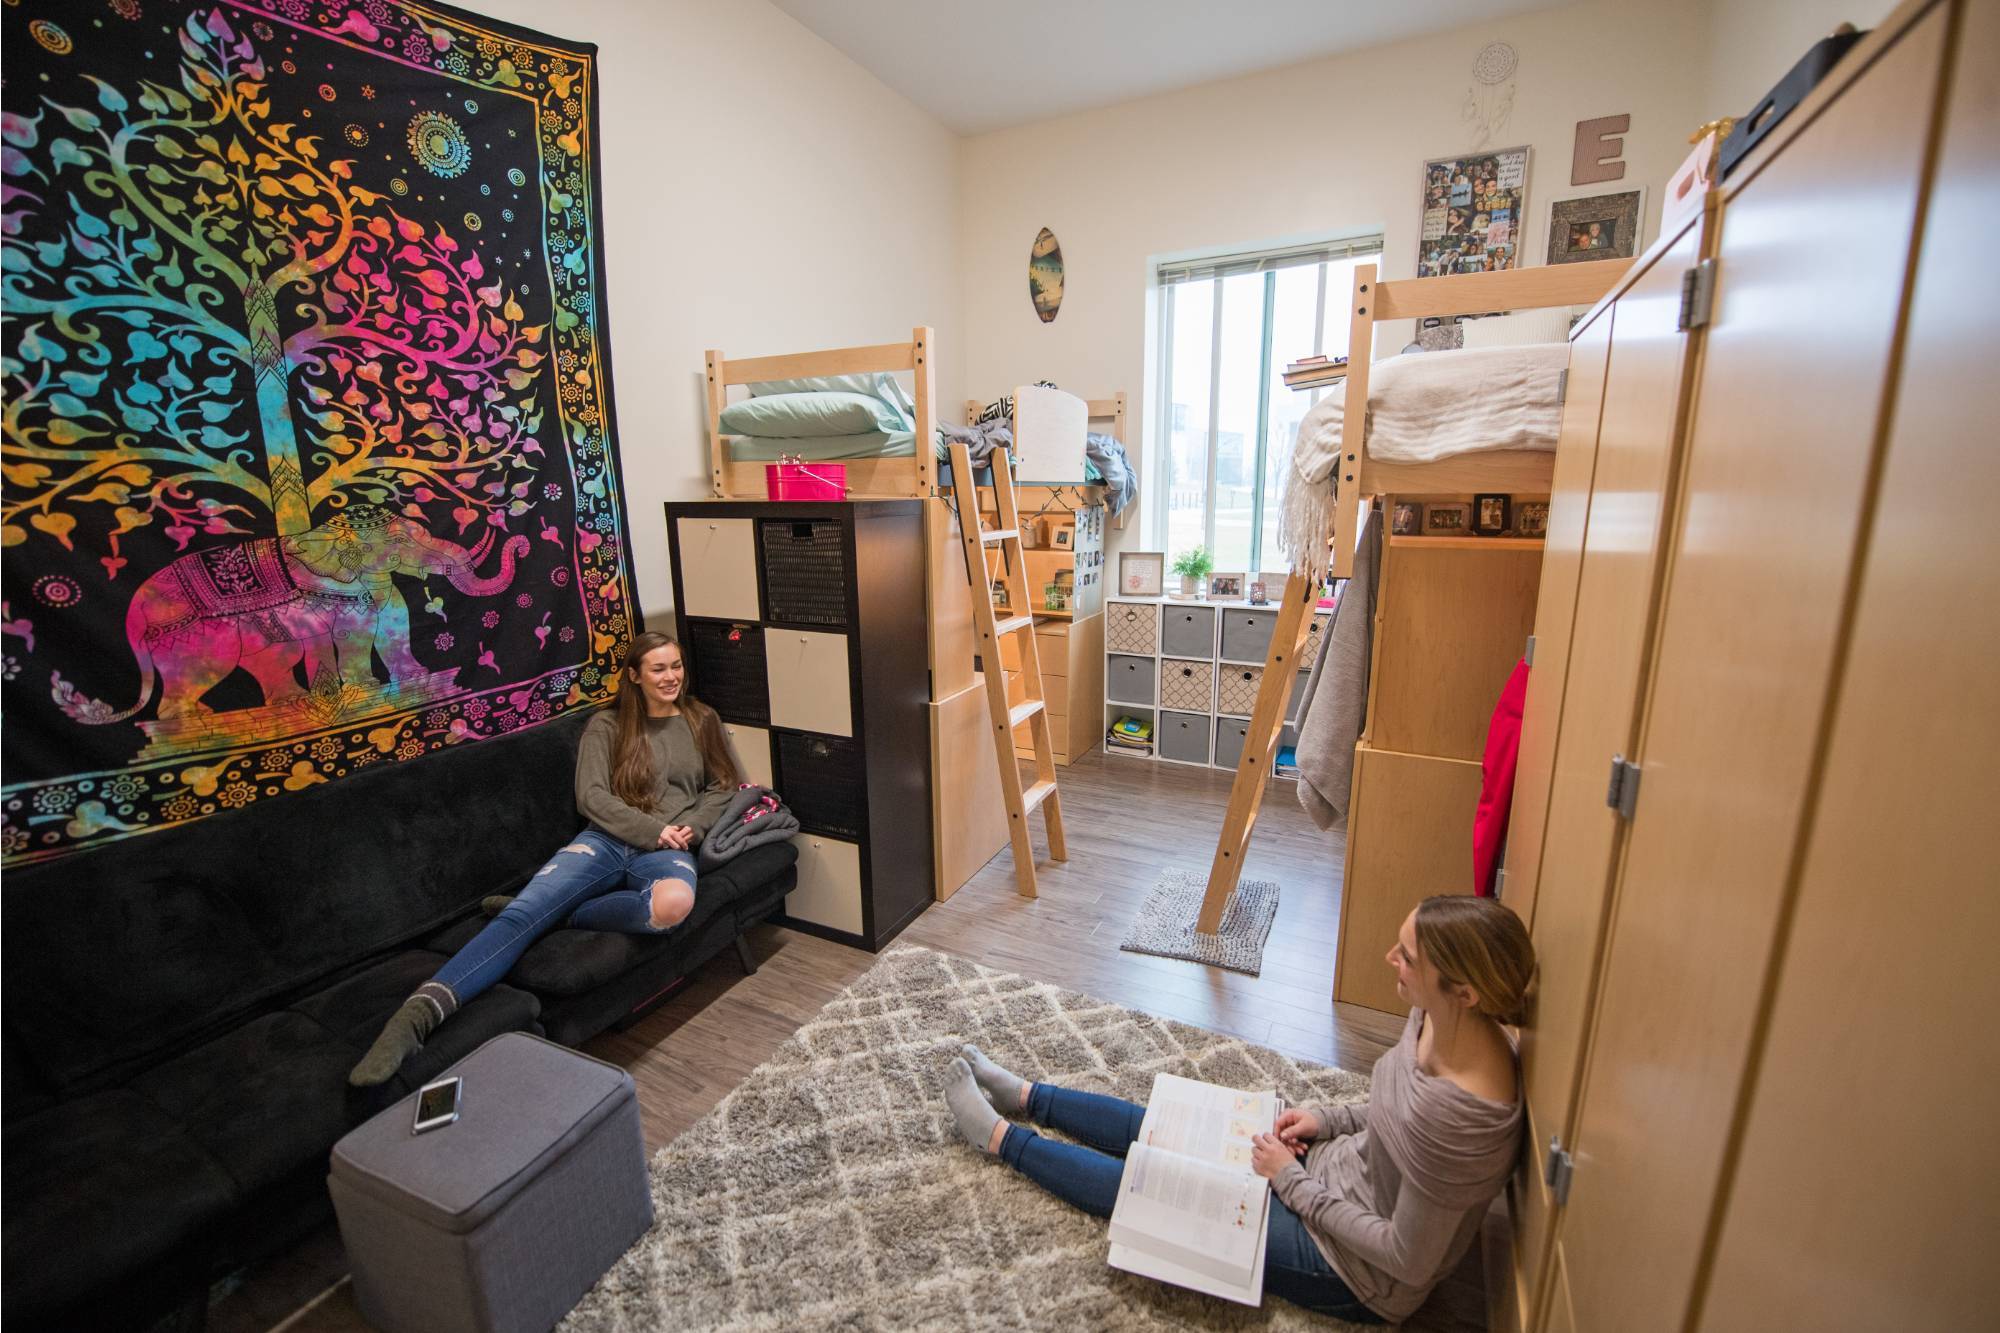 GVSU cluster-style student residents studying in their room.